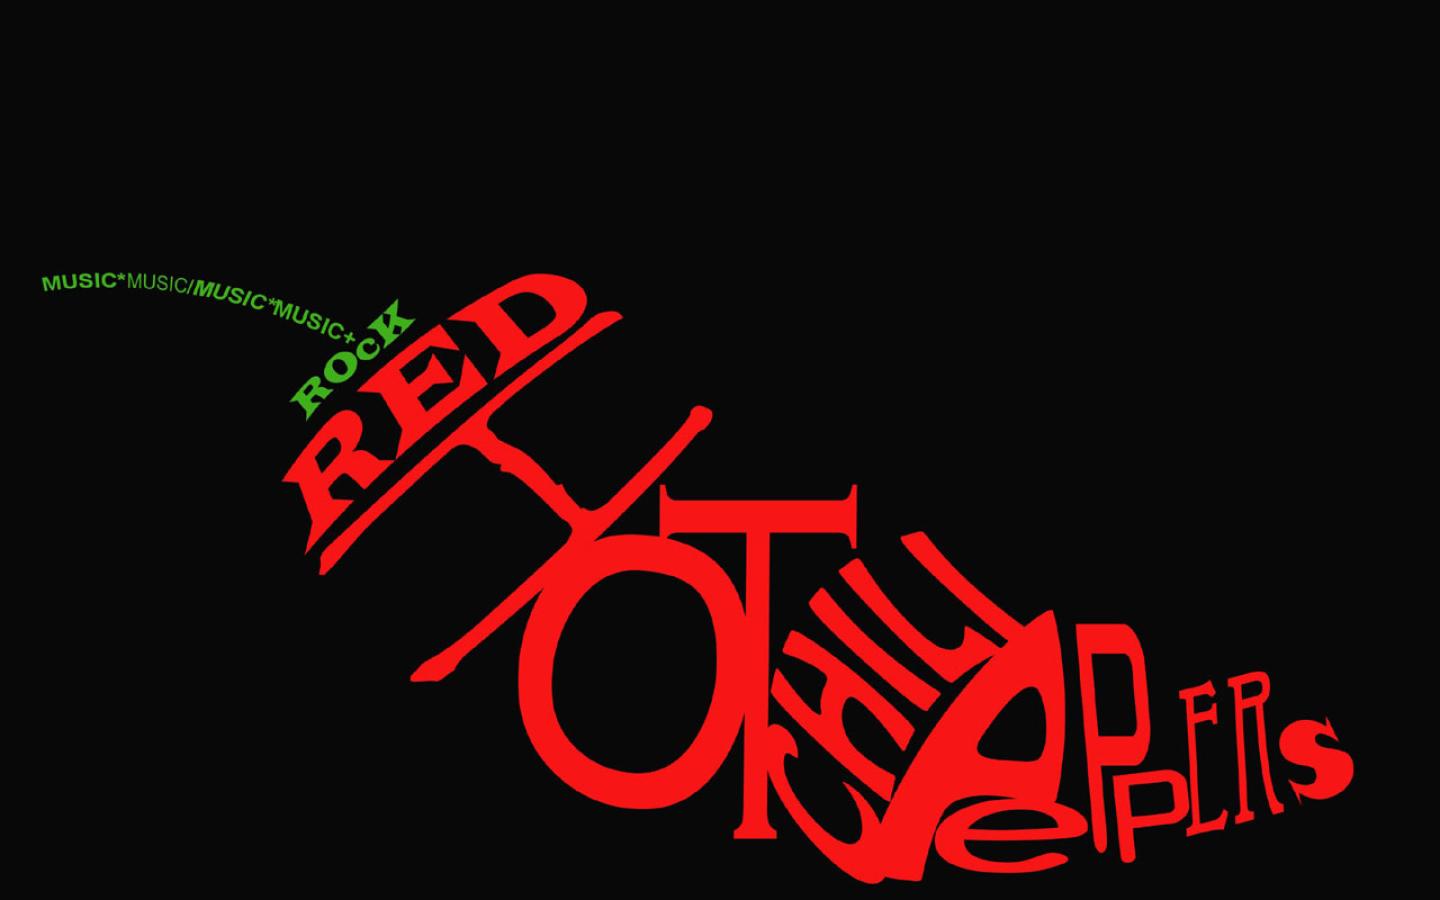 Red Hot Chilli Peppers Wallpaper #4 1440 x 900 